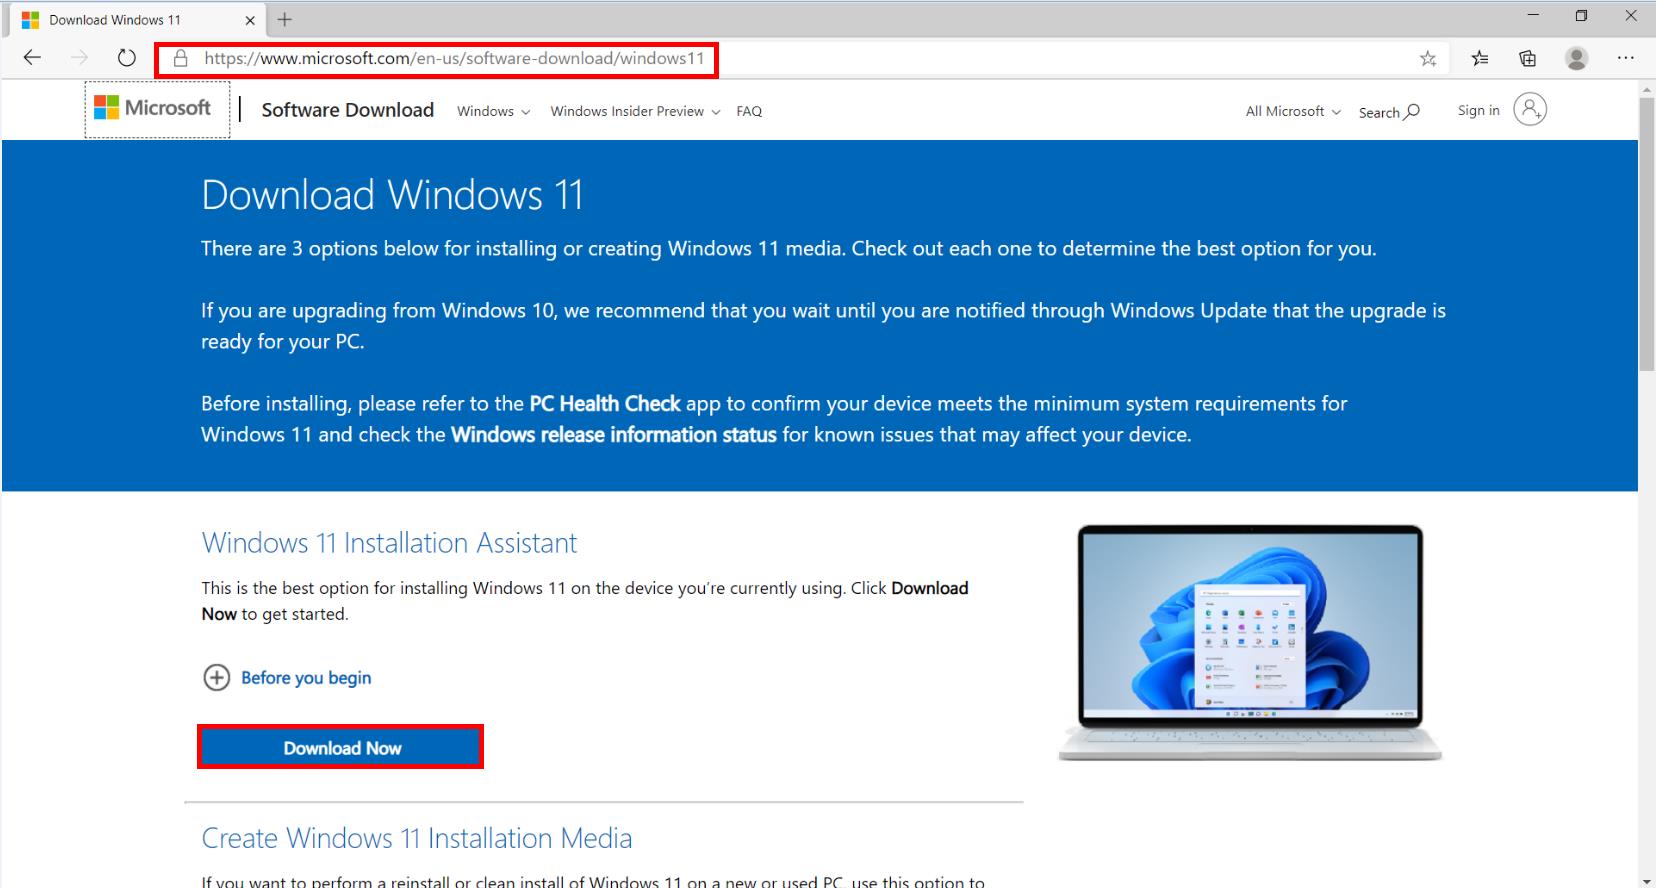 Windows 11 Installation Assistant 1.4.19041.3630 instal the new